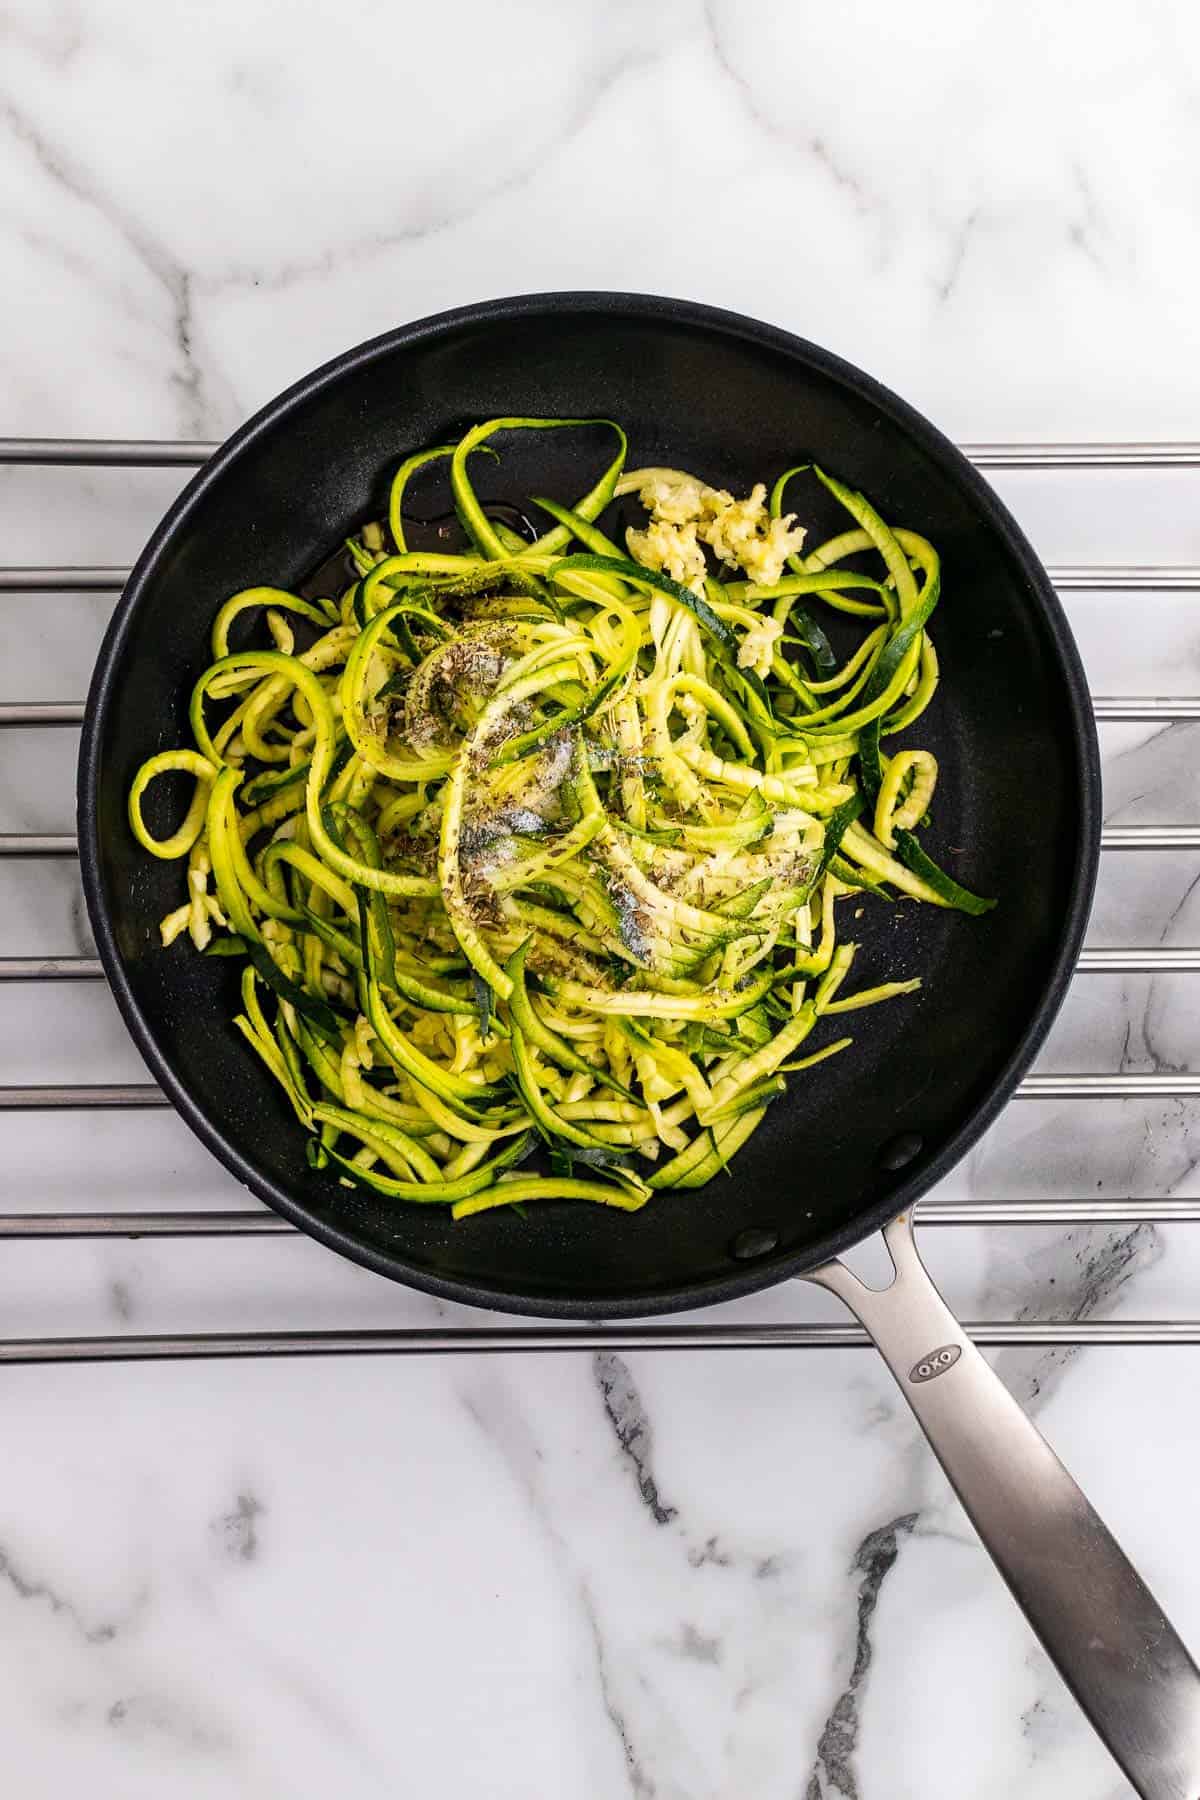 Zucchini noodles, spices, and walnuts in a pan